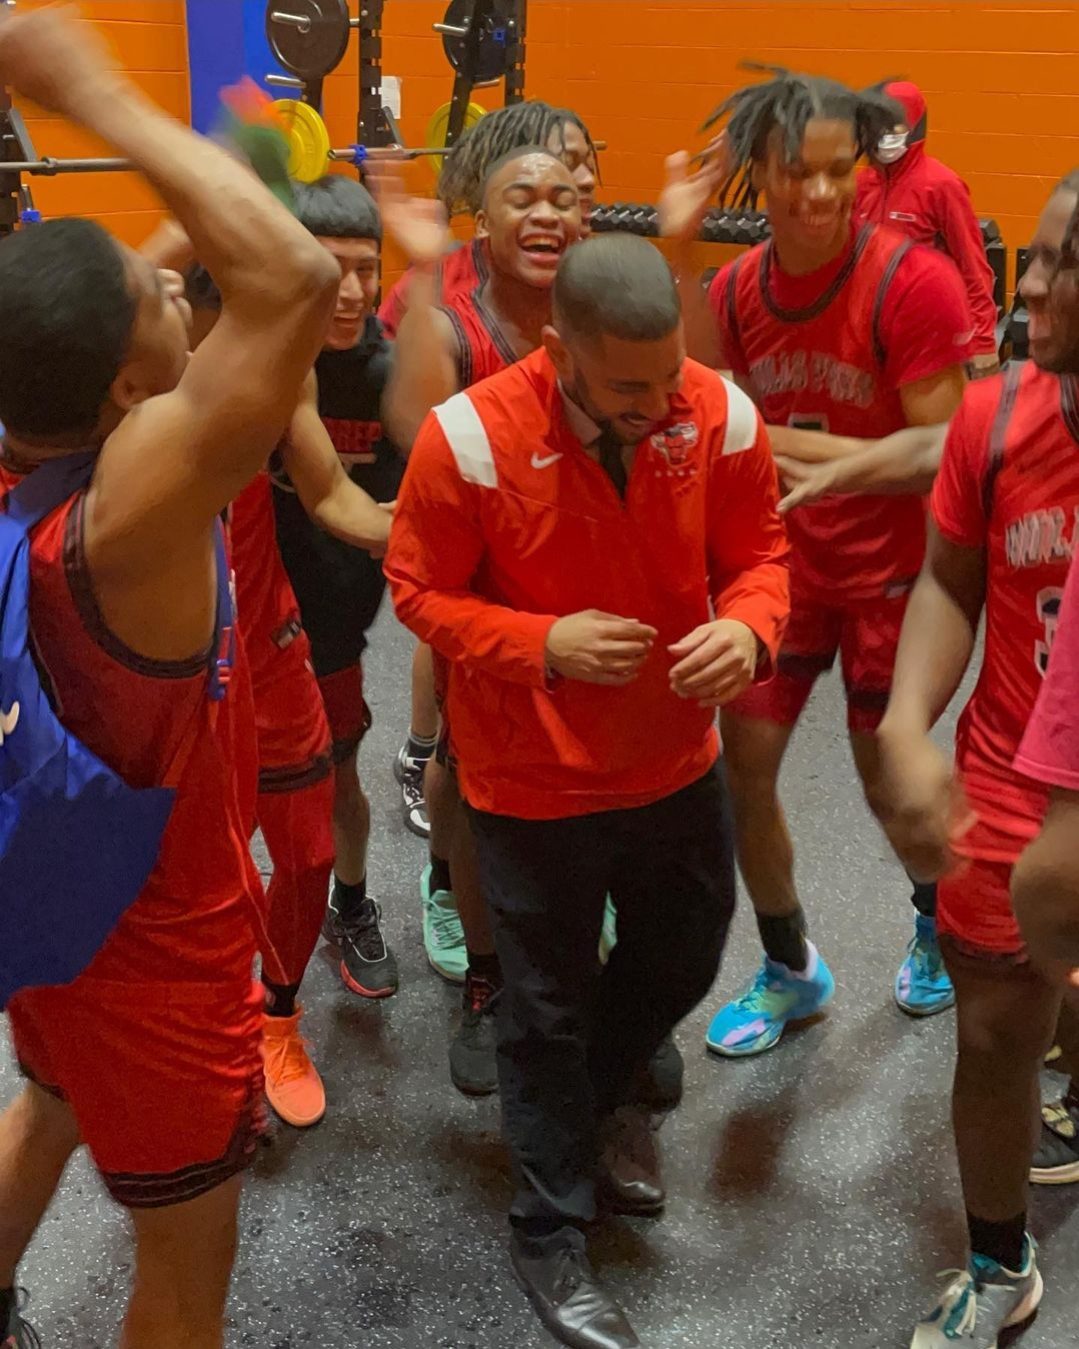 The Chicago Bulls College Prep basketball team celebrates their 100th win as Mr. Goldstein is cheering with them. The team crowds around Mr. Goldestein as he has his head down, smiling with them.